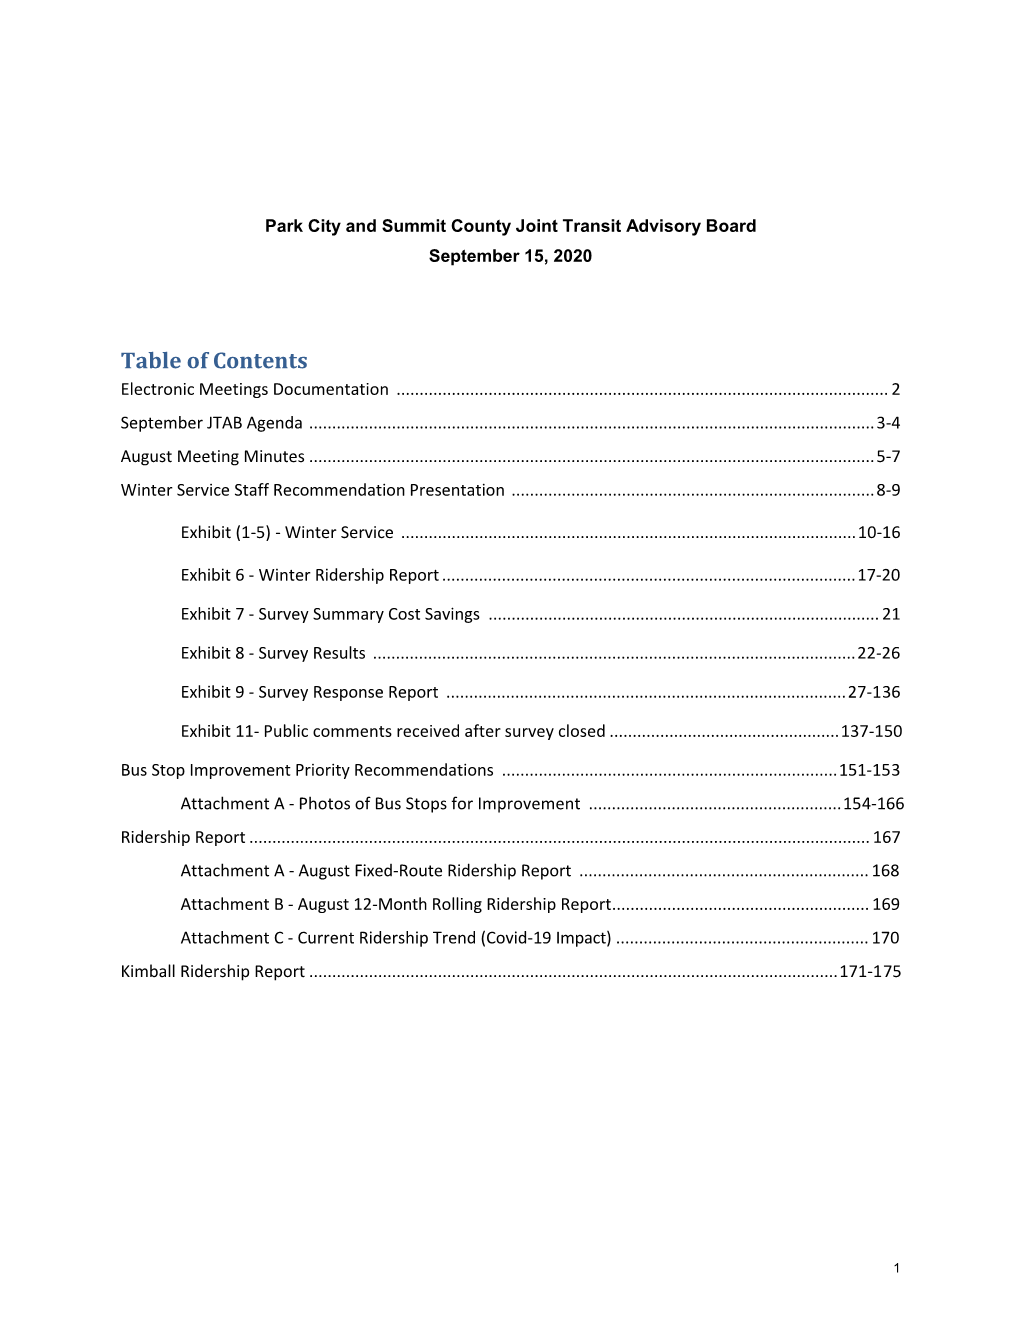 Table of Contents Electronic Meetings Documentation